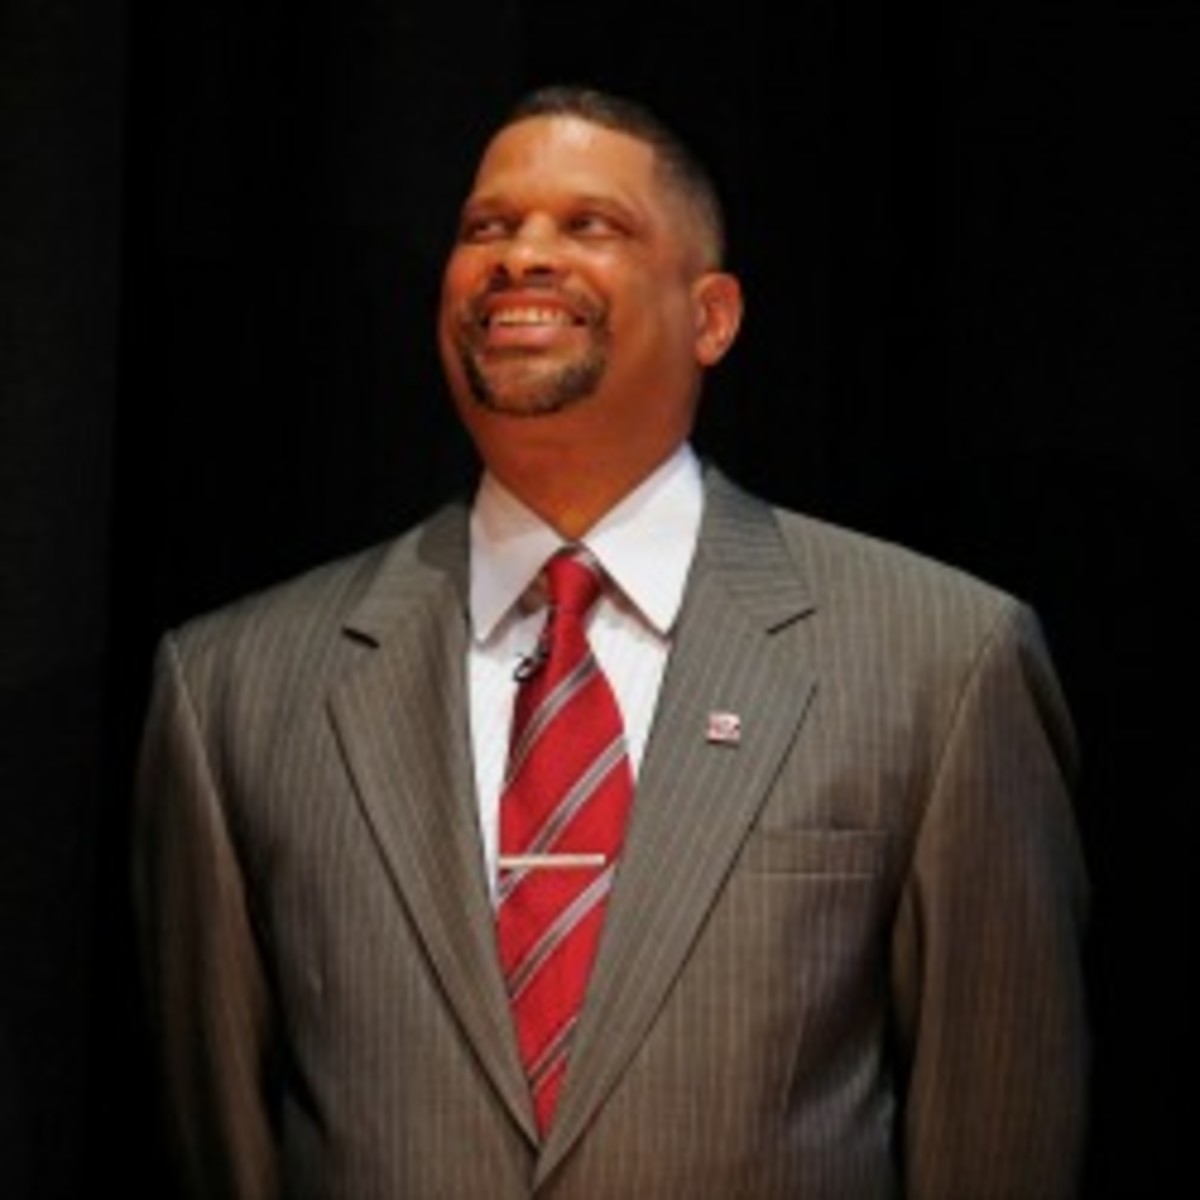 Rutgers men's basketball coach Eddie Jordan never actually graduated from Rutgers (Rich Schultz/Getty Images)